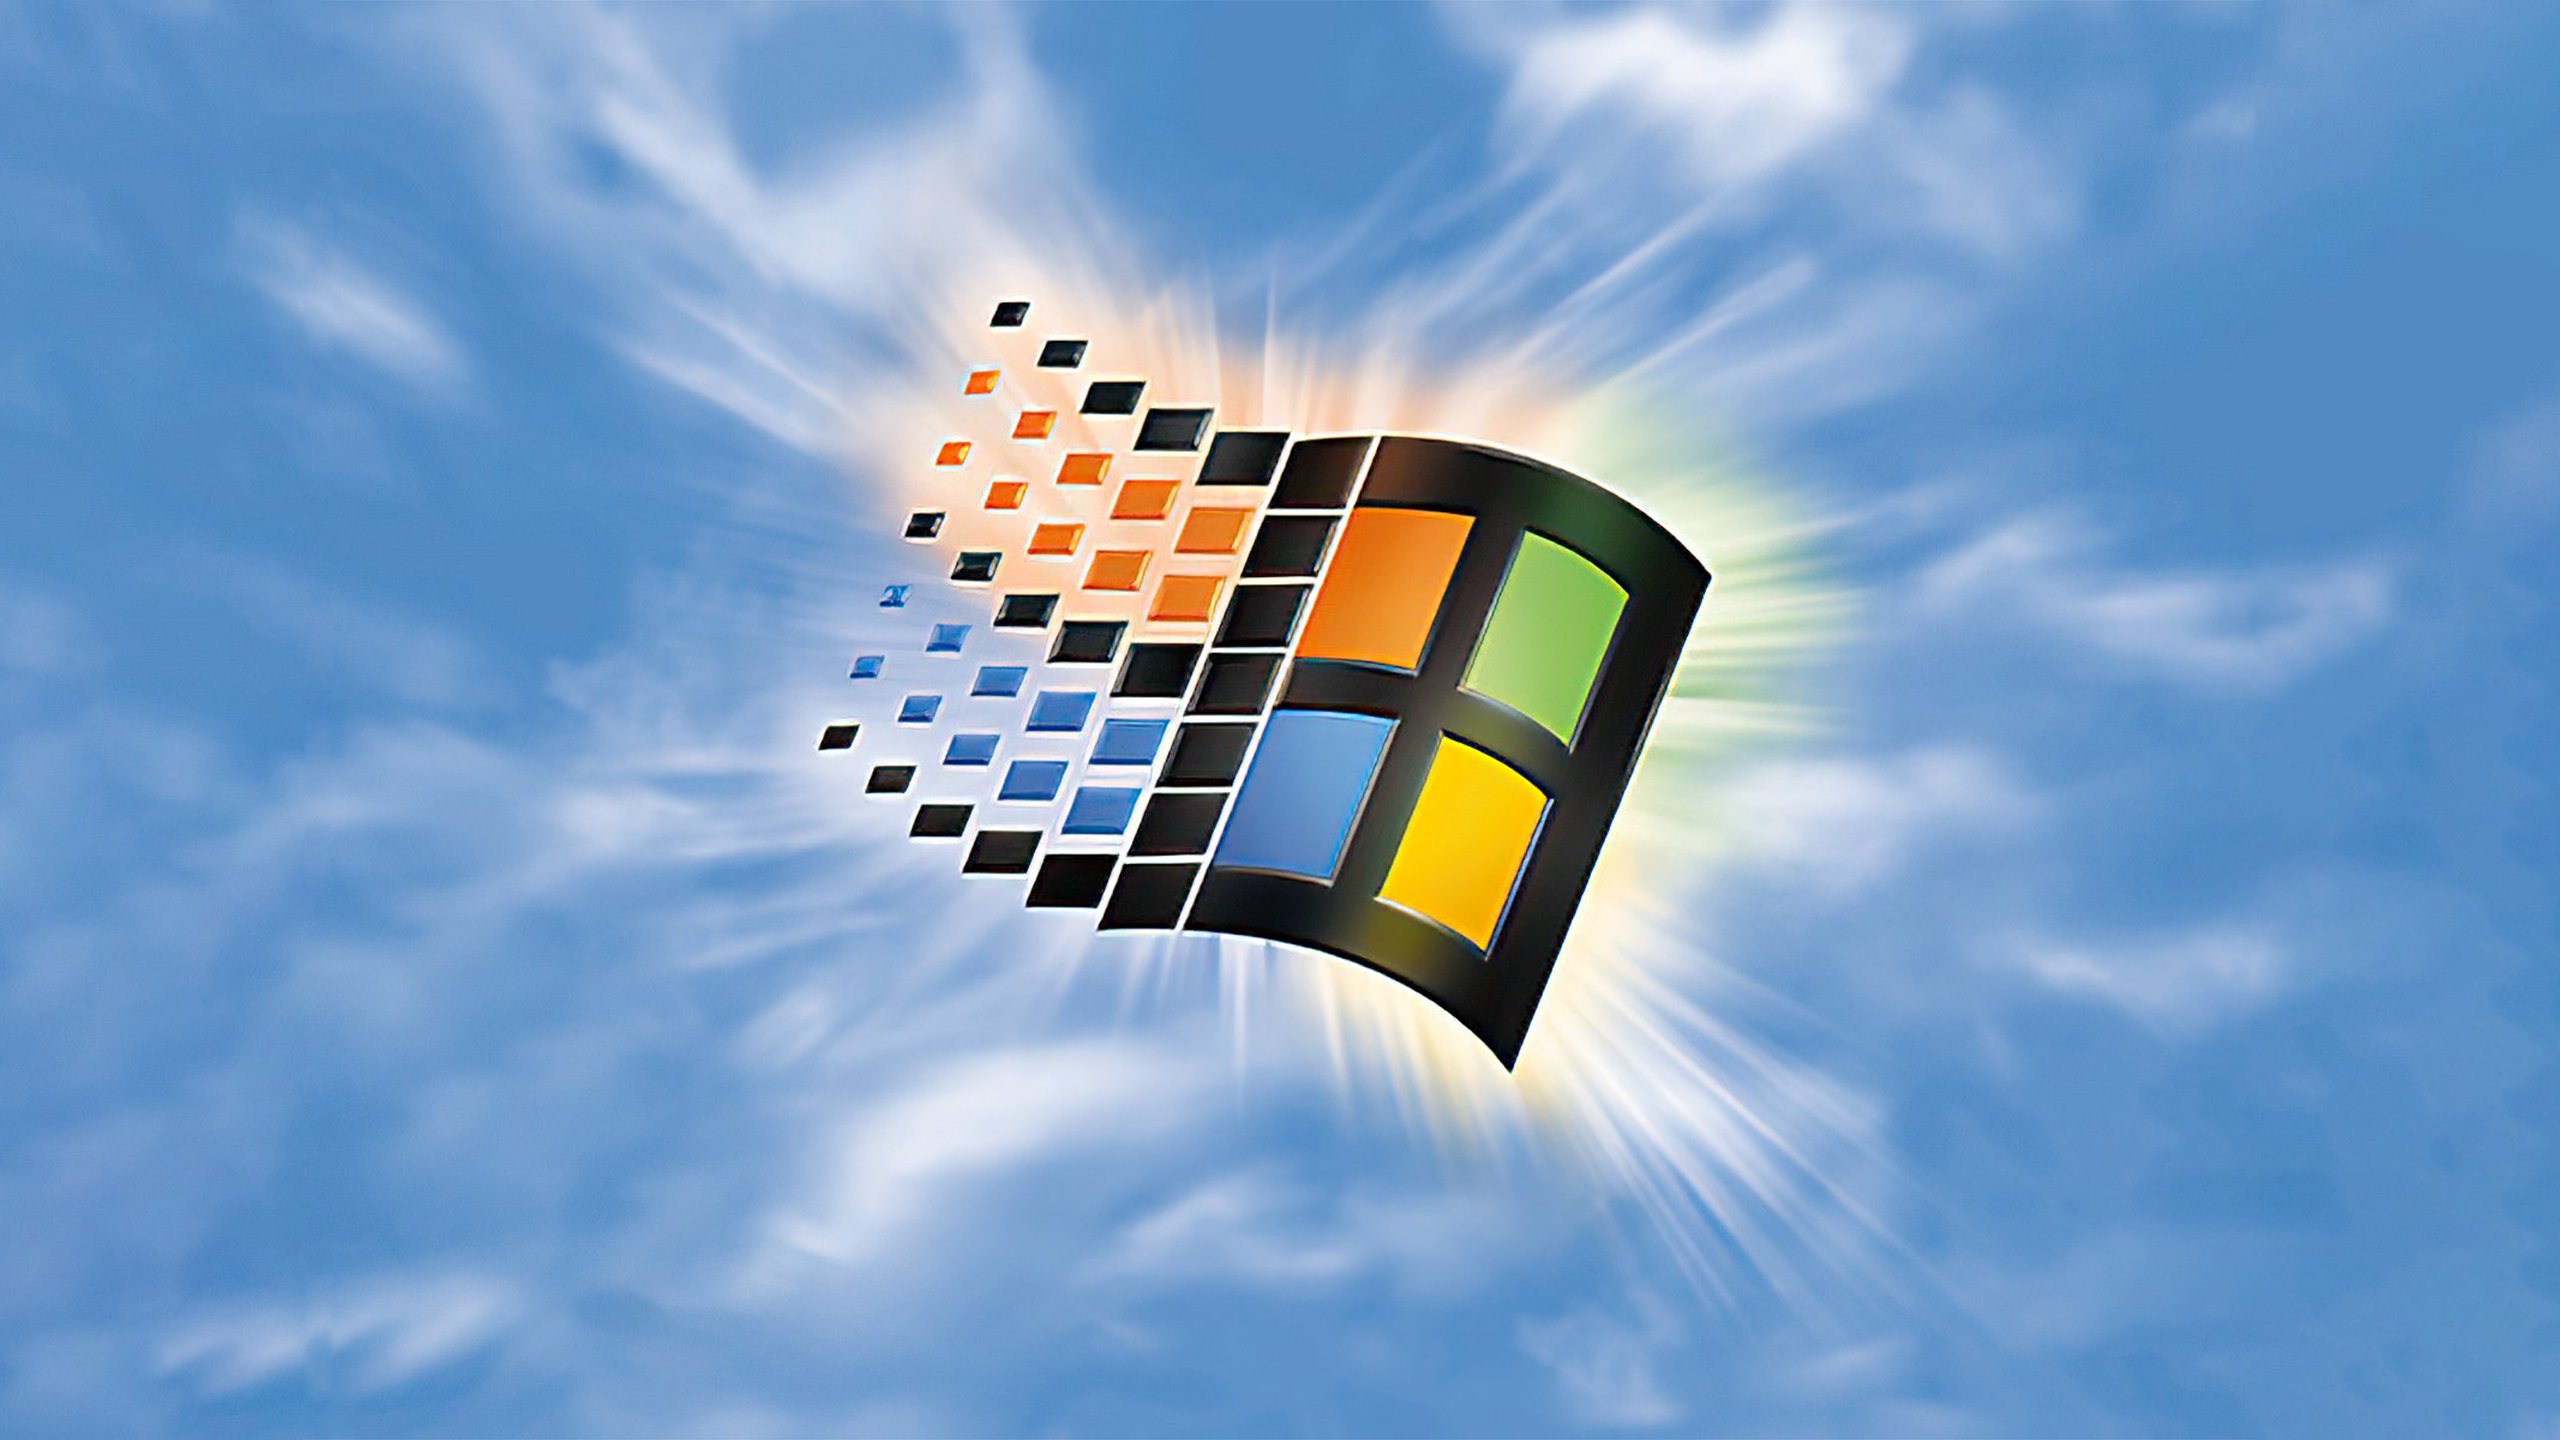 Betacollector This Glorious Windows 98 Image Was Living On An Old Msn Cd I Was Just Rummaging Through Iconic T Co Bmvmfgeuvd Twitter